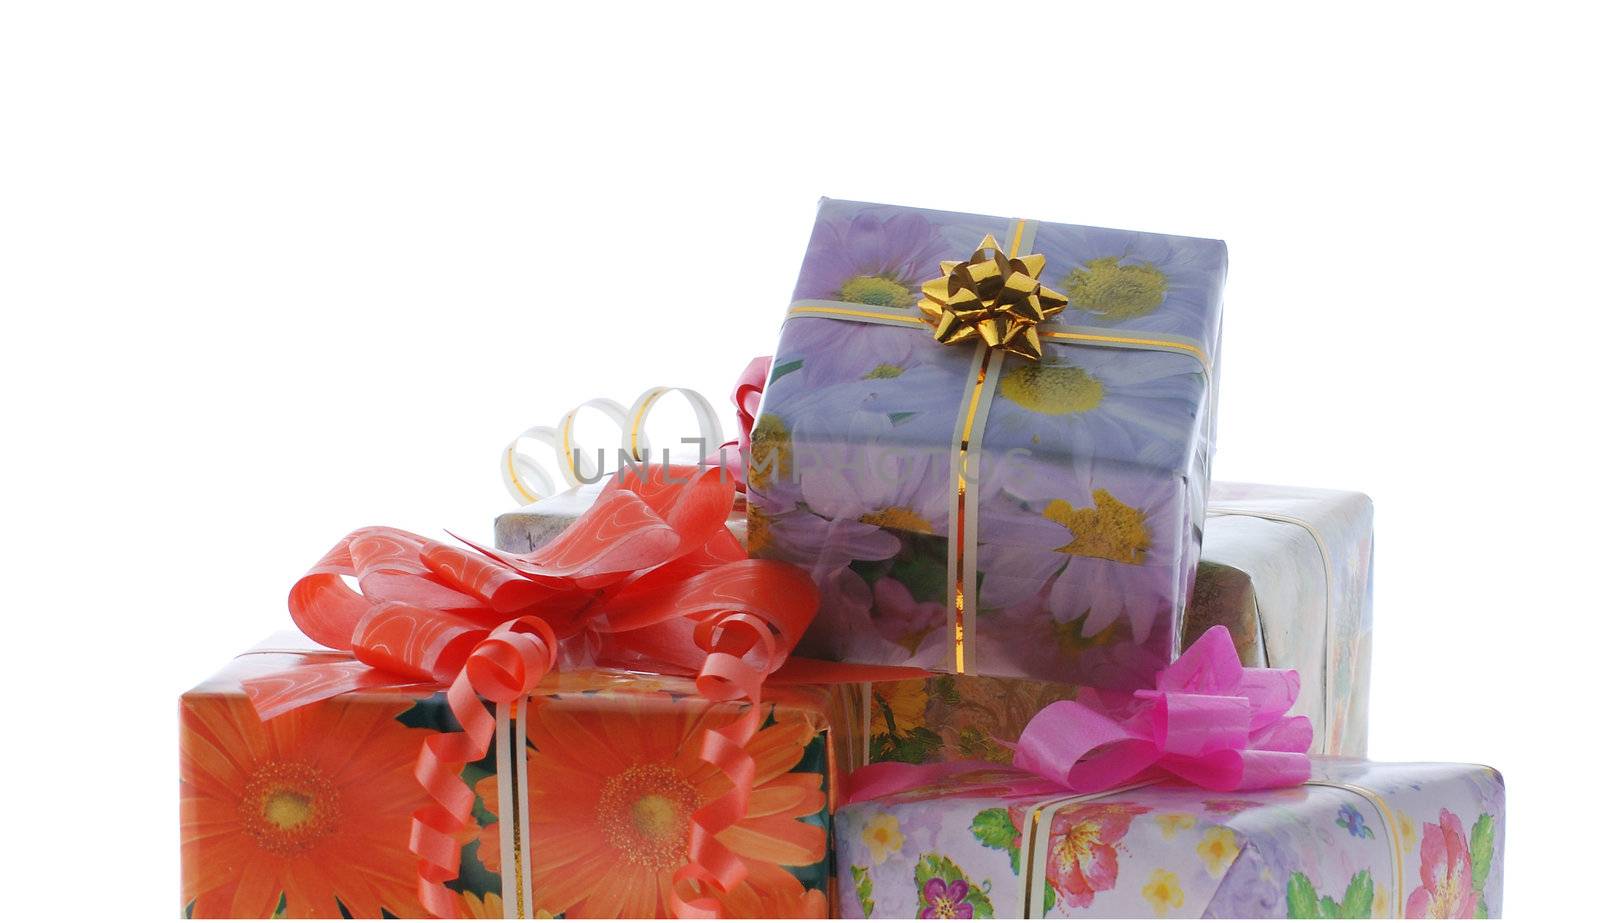 boxes with gifts. It is isolated on a white background